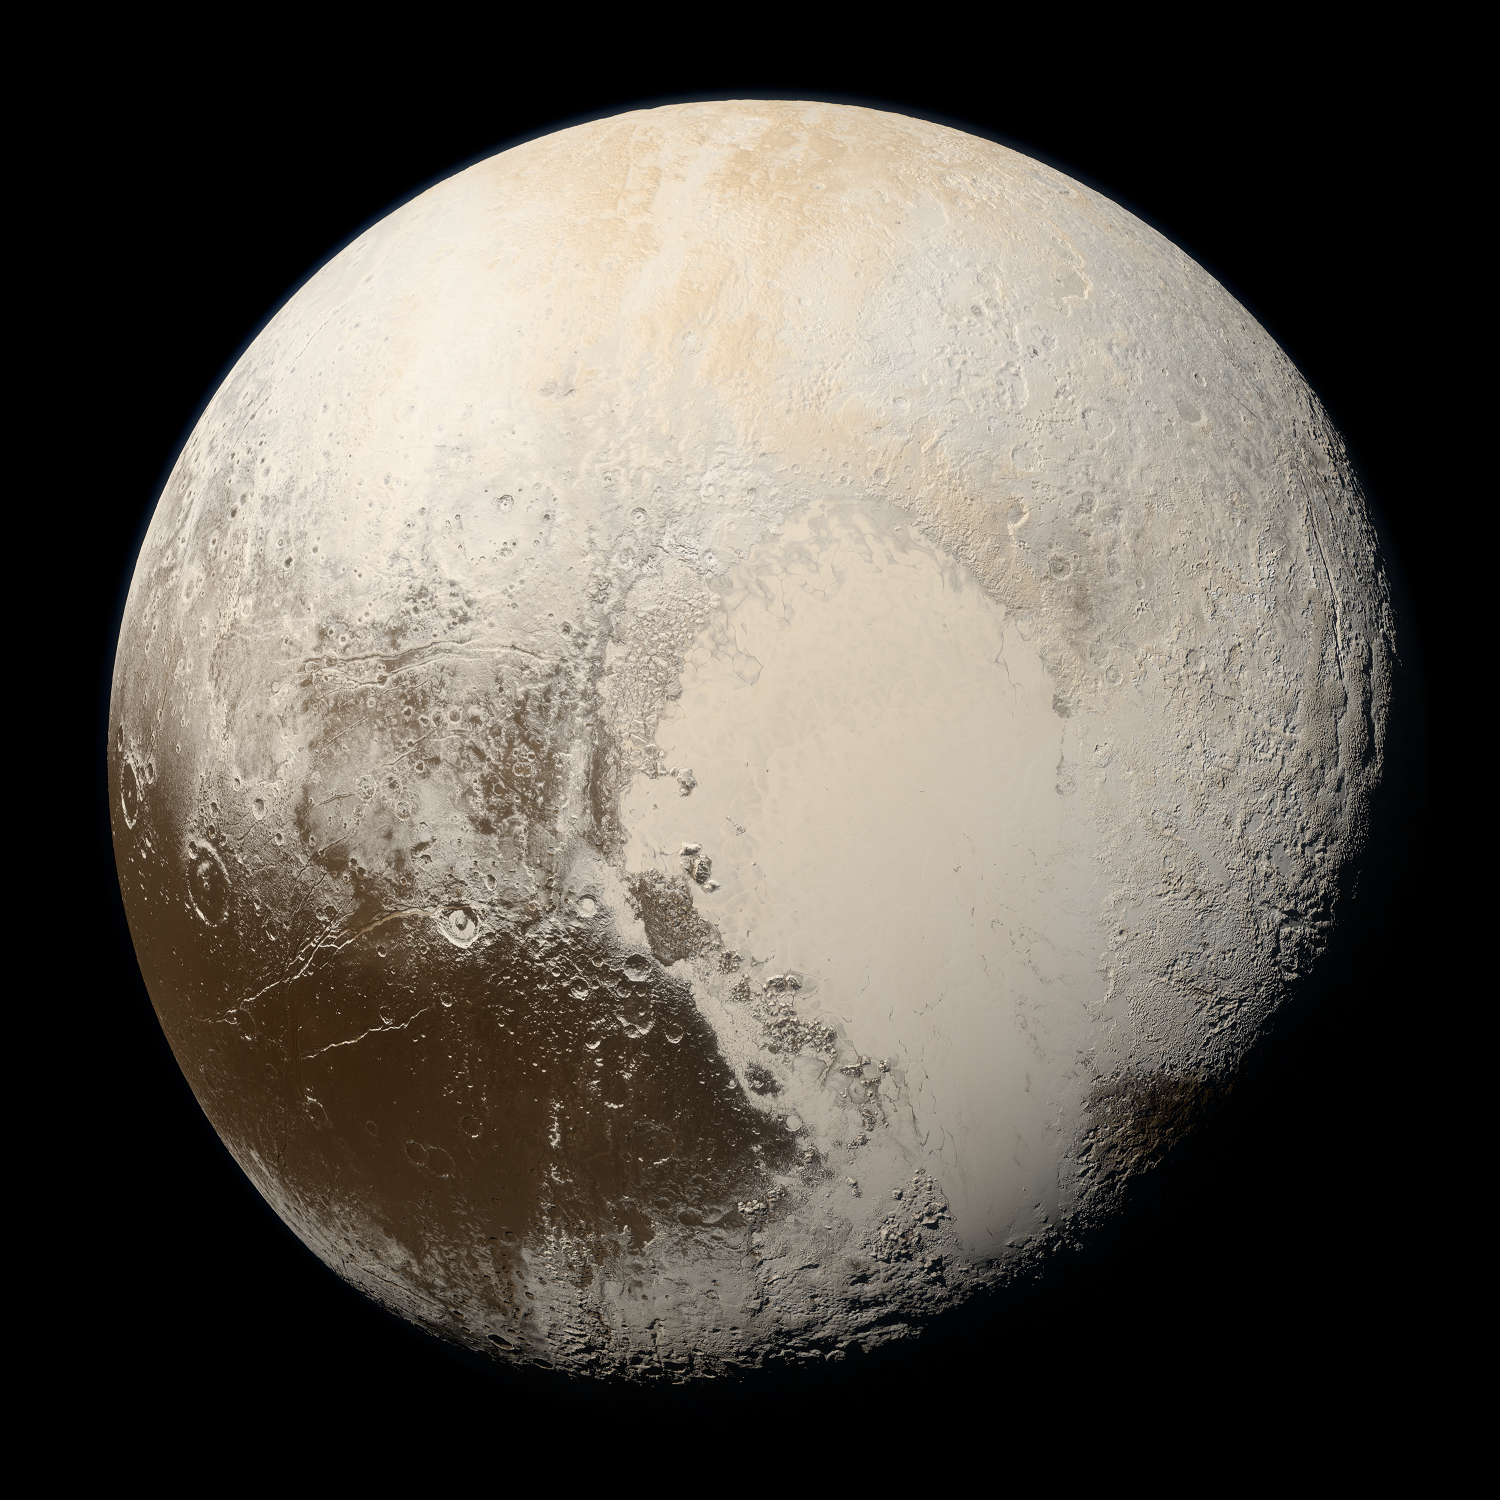 Pluto the dwarf planet in natural grays and browns. Taken by NASA's New Horizons probe.